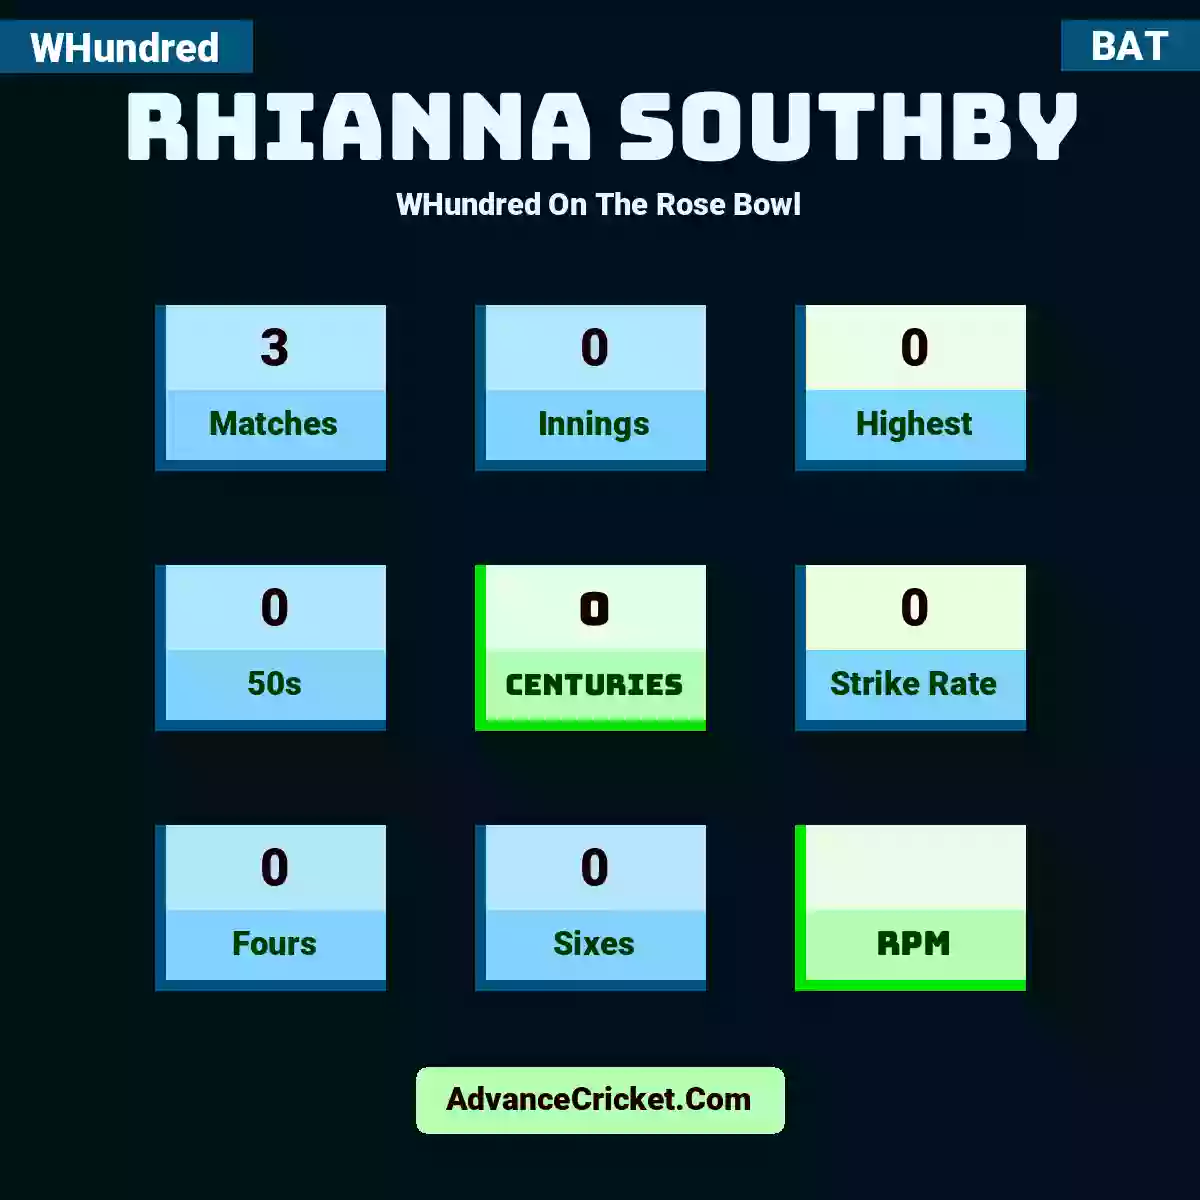 Rhianna Southby WHundred  On The Rose Bowl, Rhianna Southby played 3 matches, scored 0 runs as highest, 0 half-centuries, and 0 centuries, with a strike rate of 0. R.Southby hit 0 fours and 0 sixes.